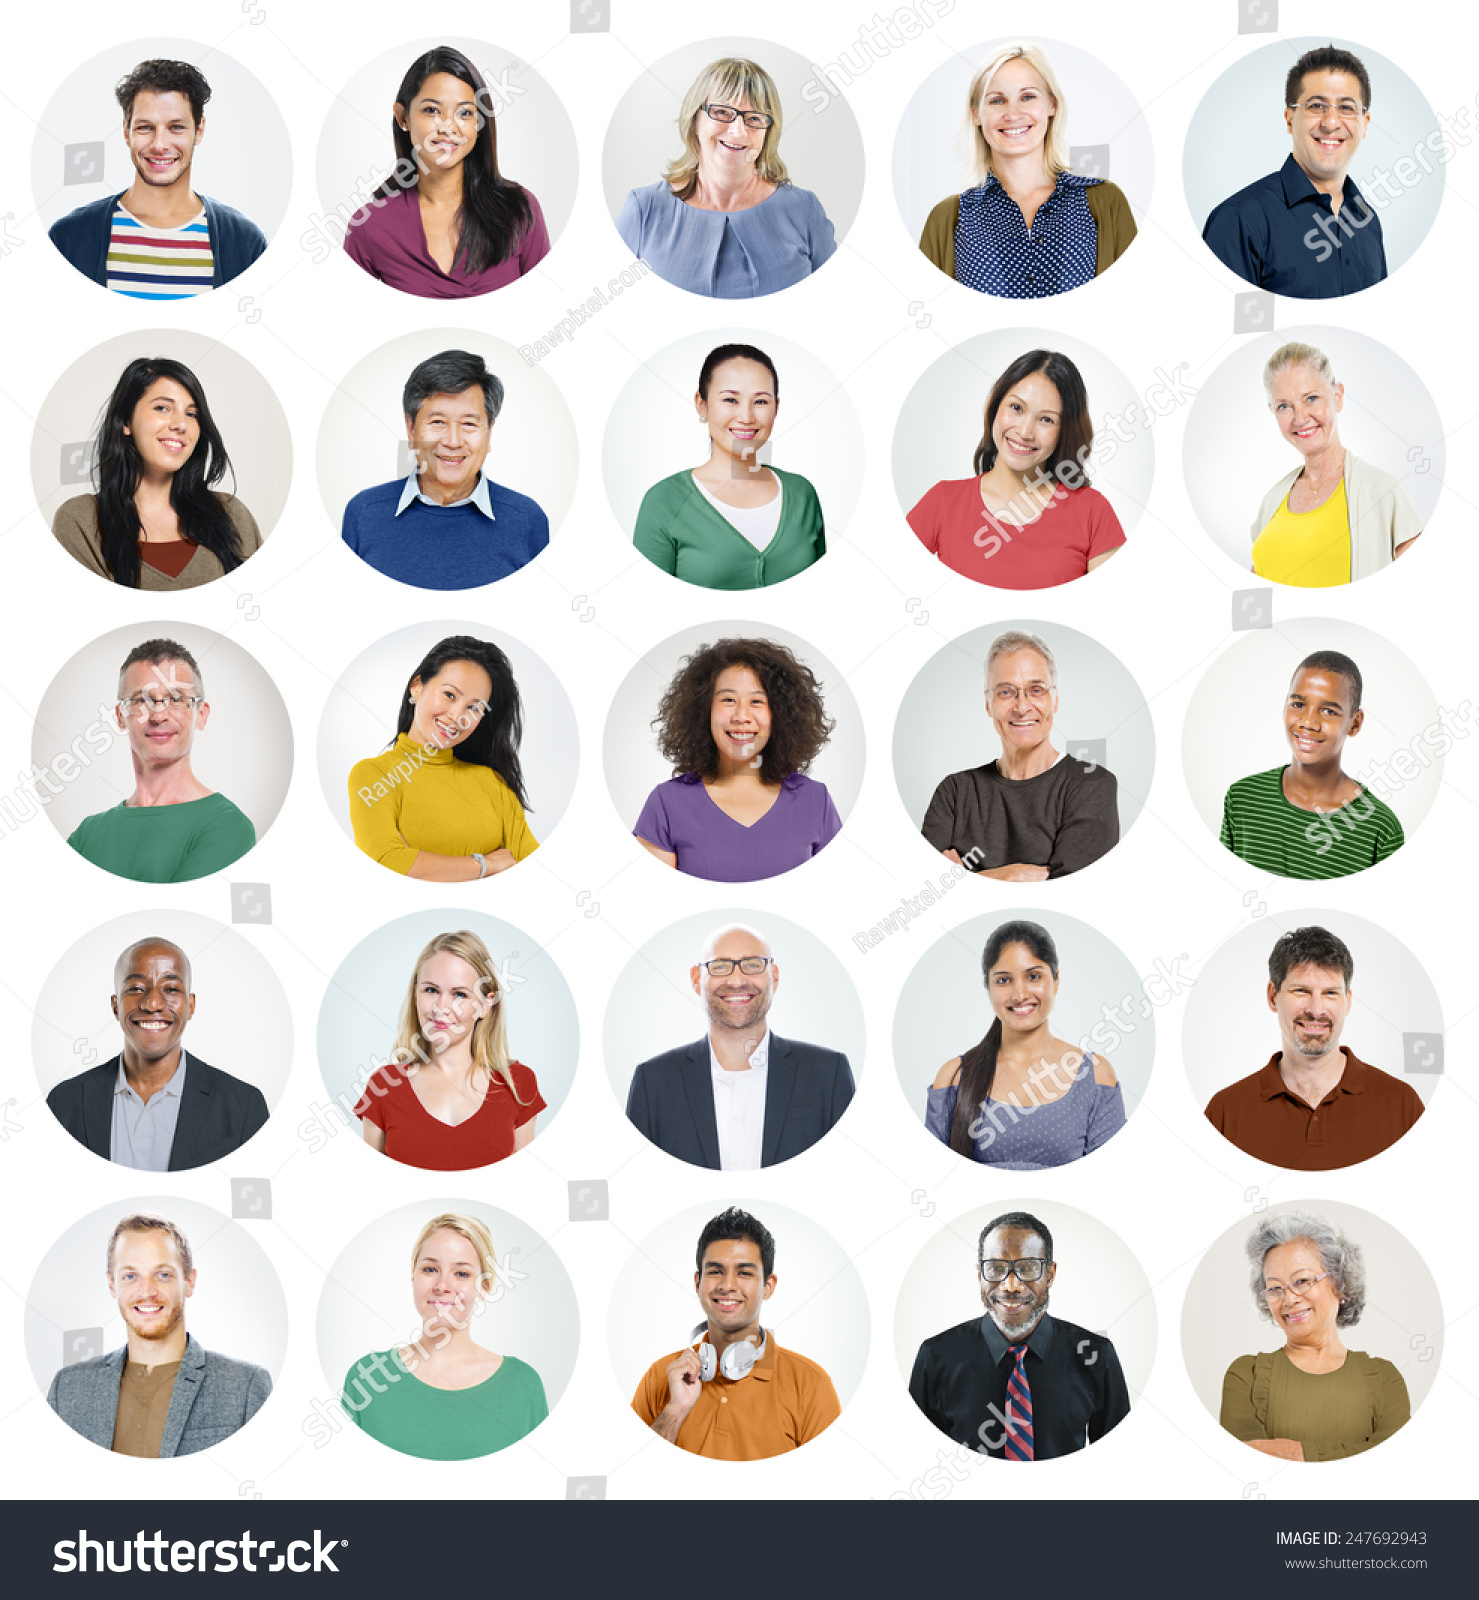 People Faces Portrait Multiethnic Cheerful Group Concept #247692943